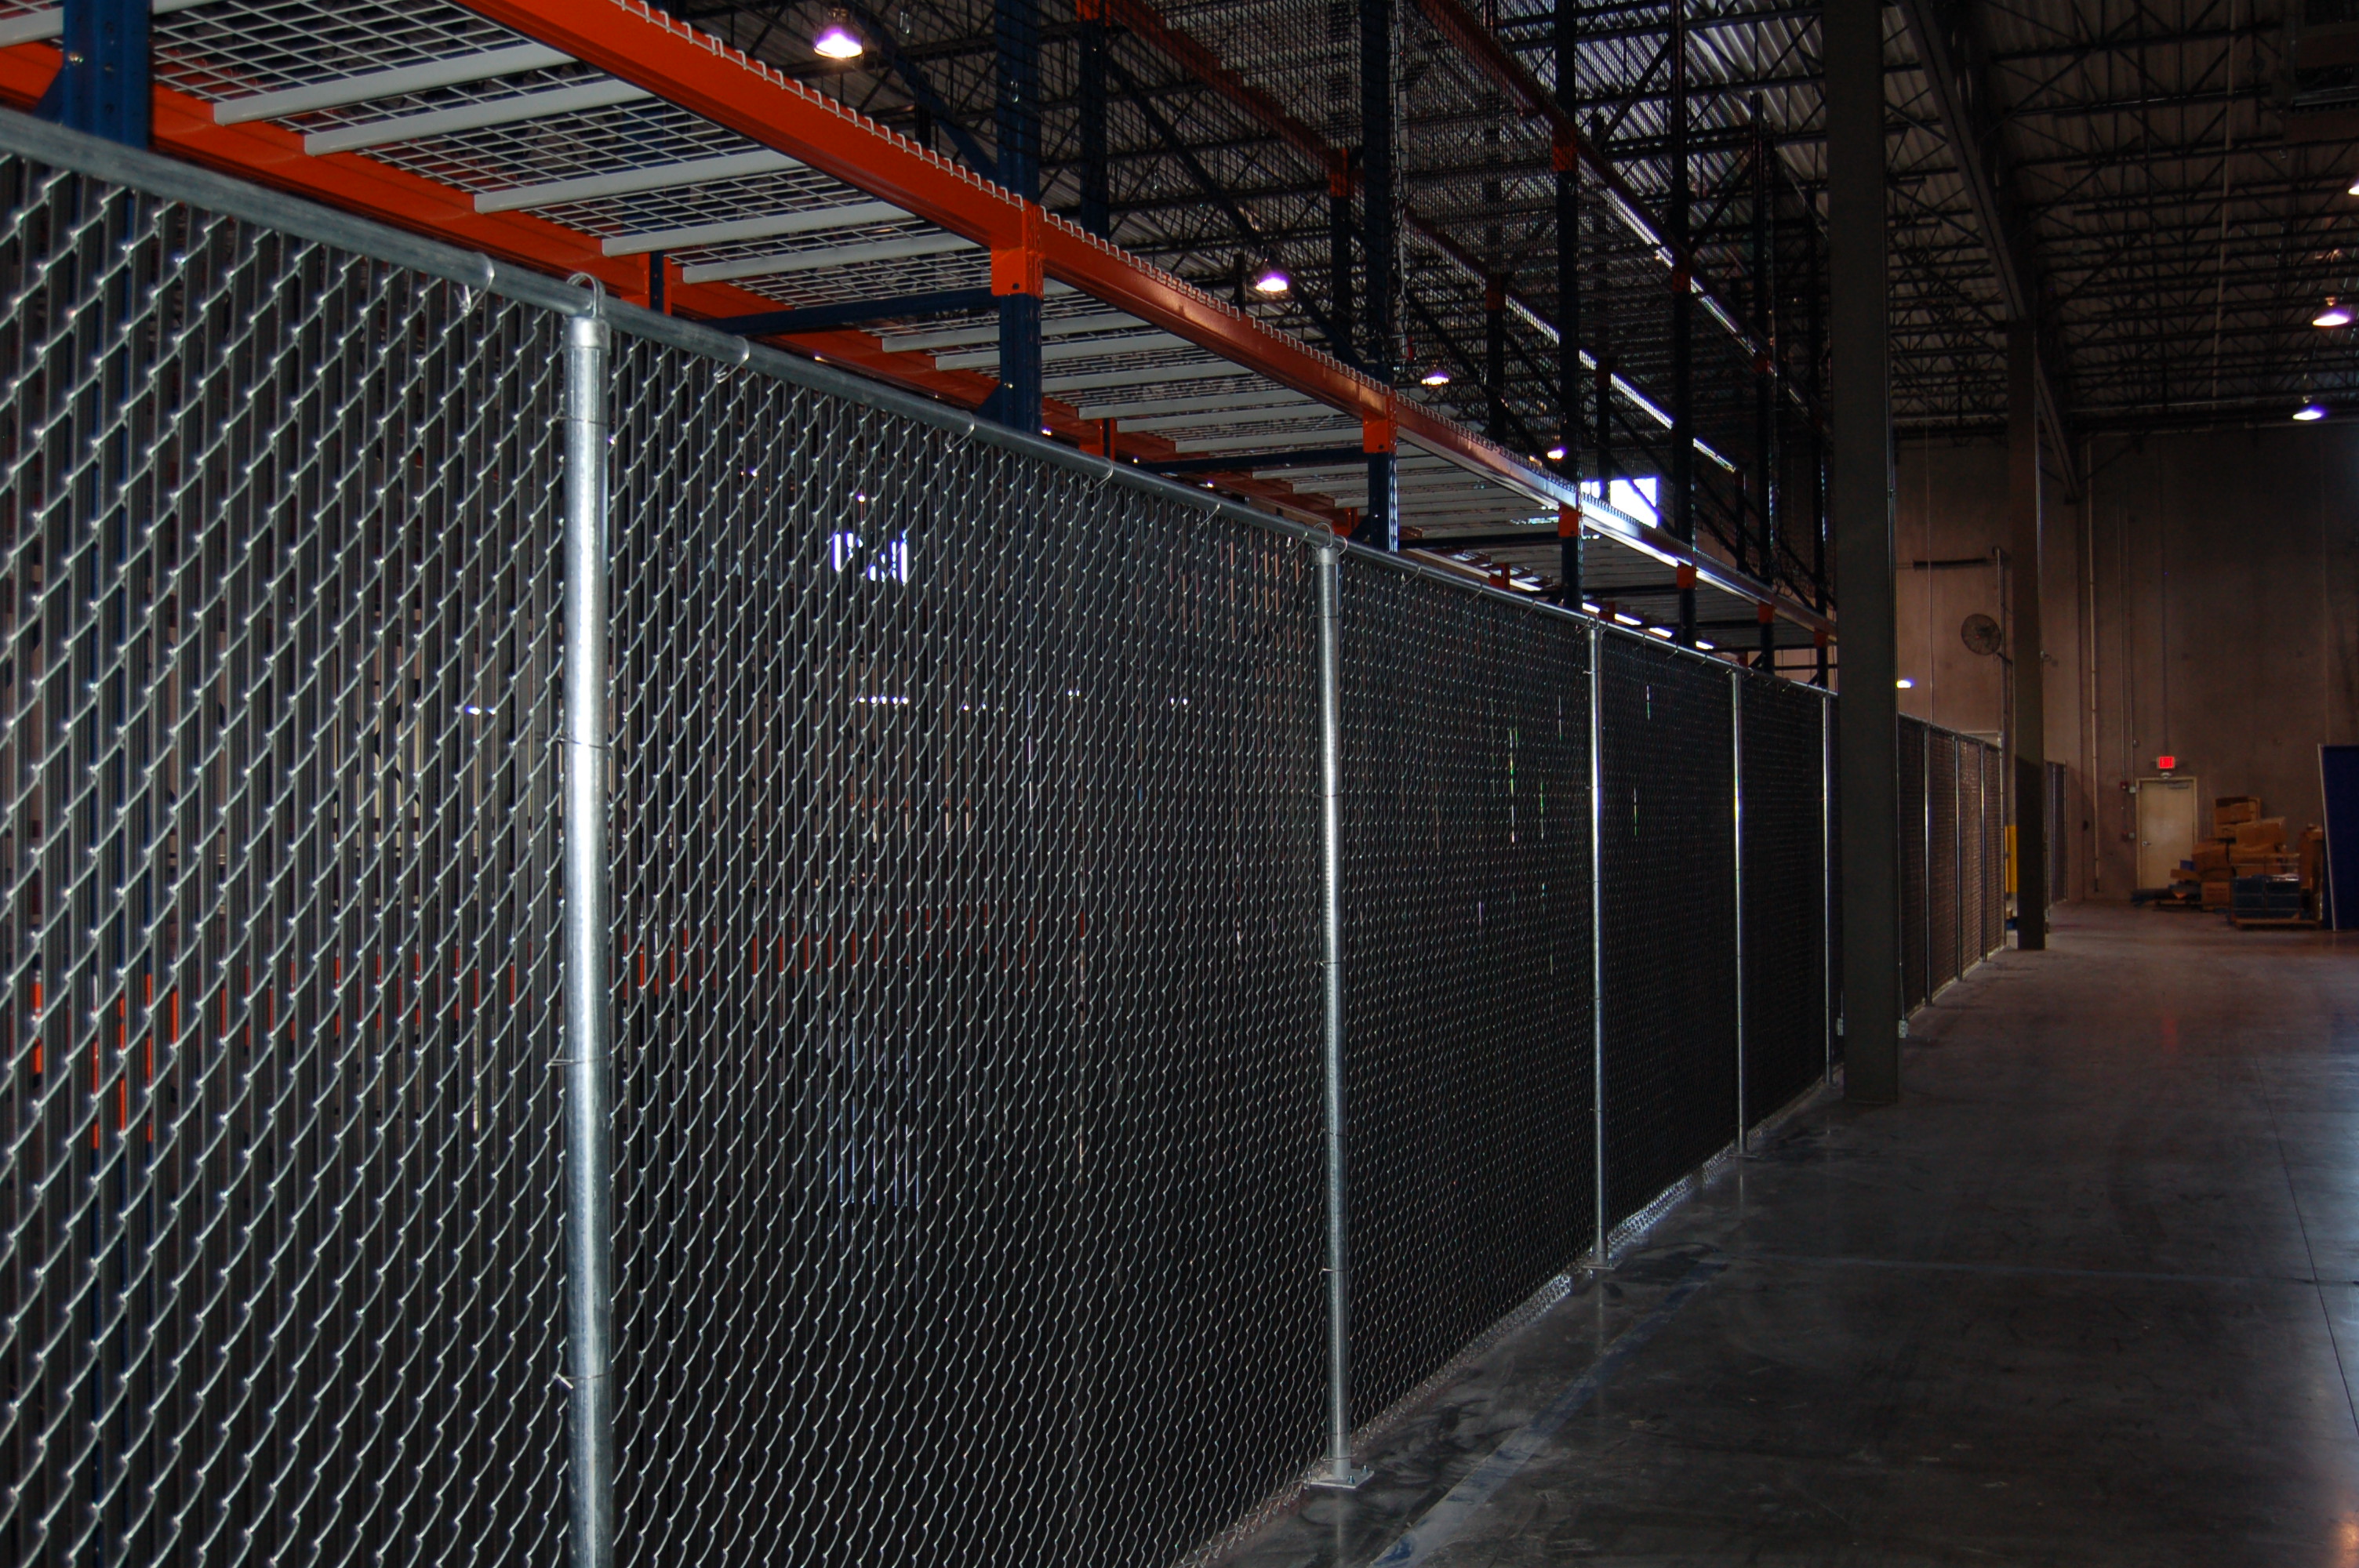 Fencing, Guide Rails, Guard Rails and Safety Equipment for Storage Systems